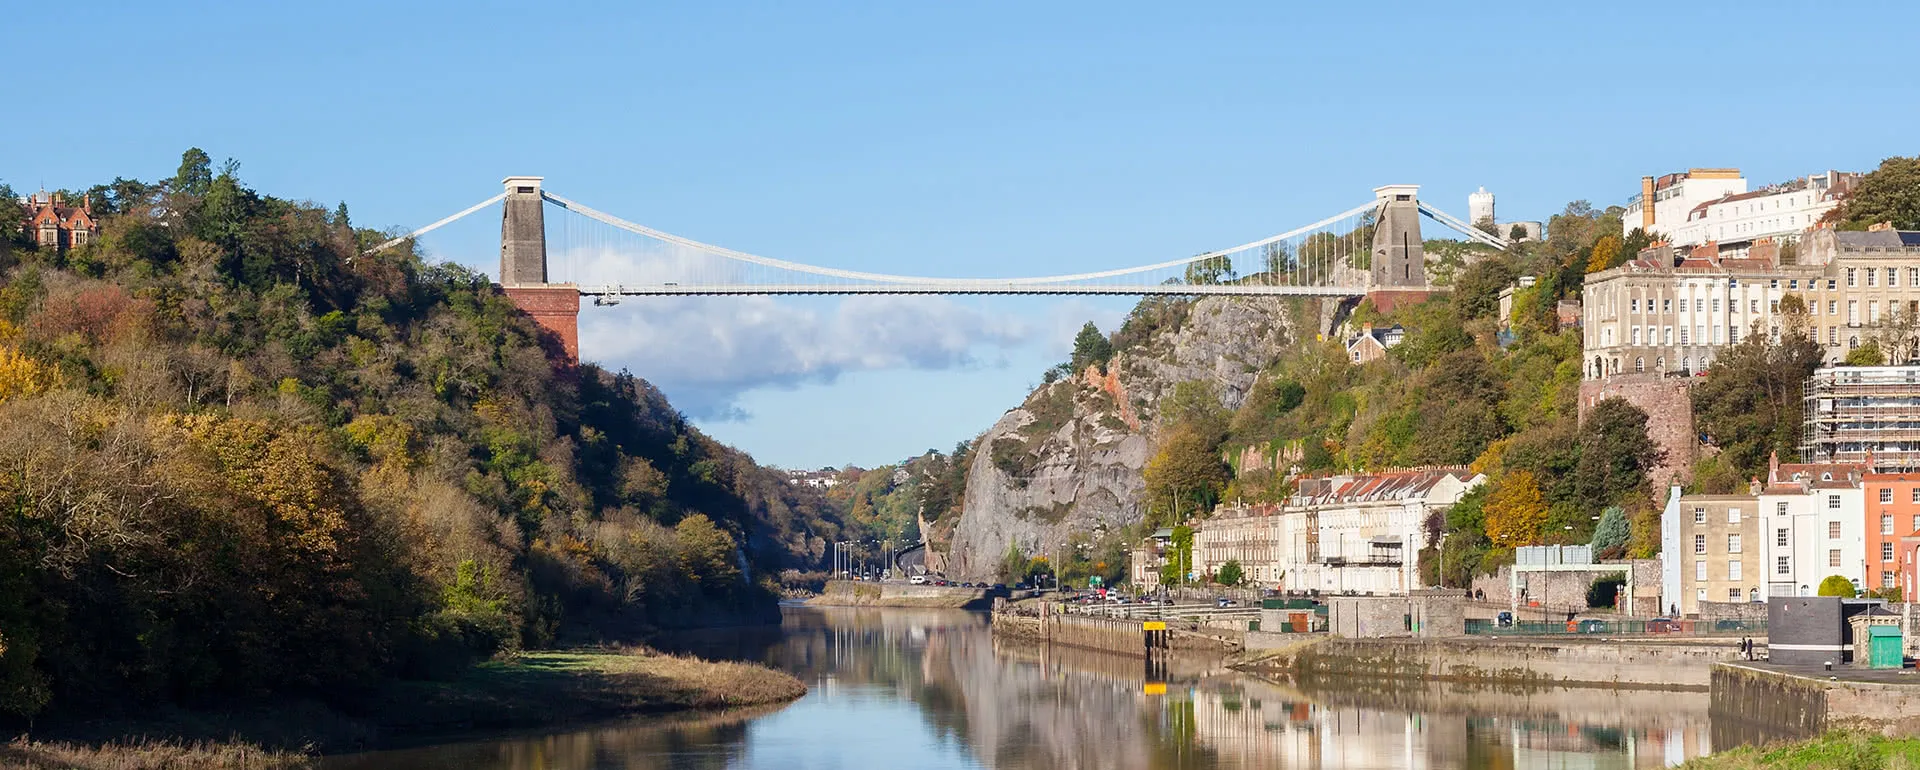 Bristol - the destination with youth hostels